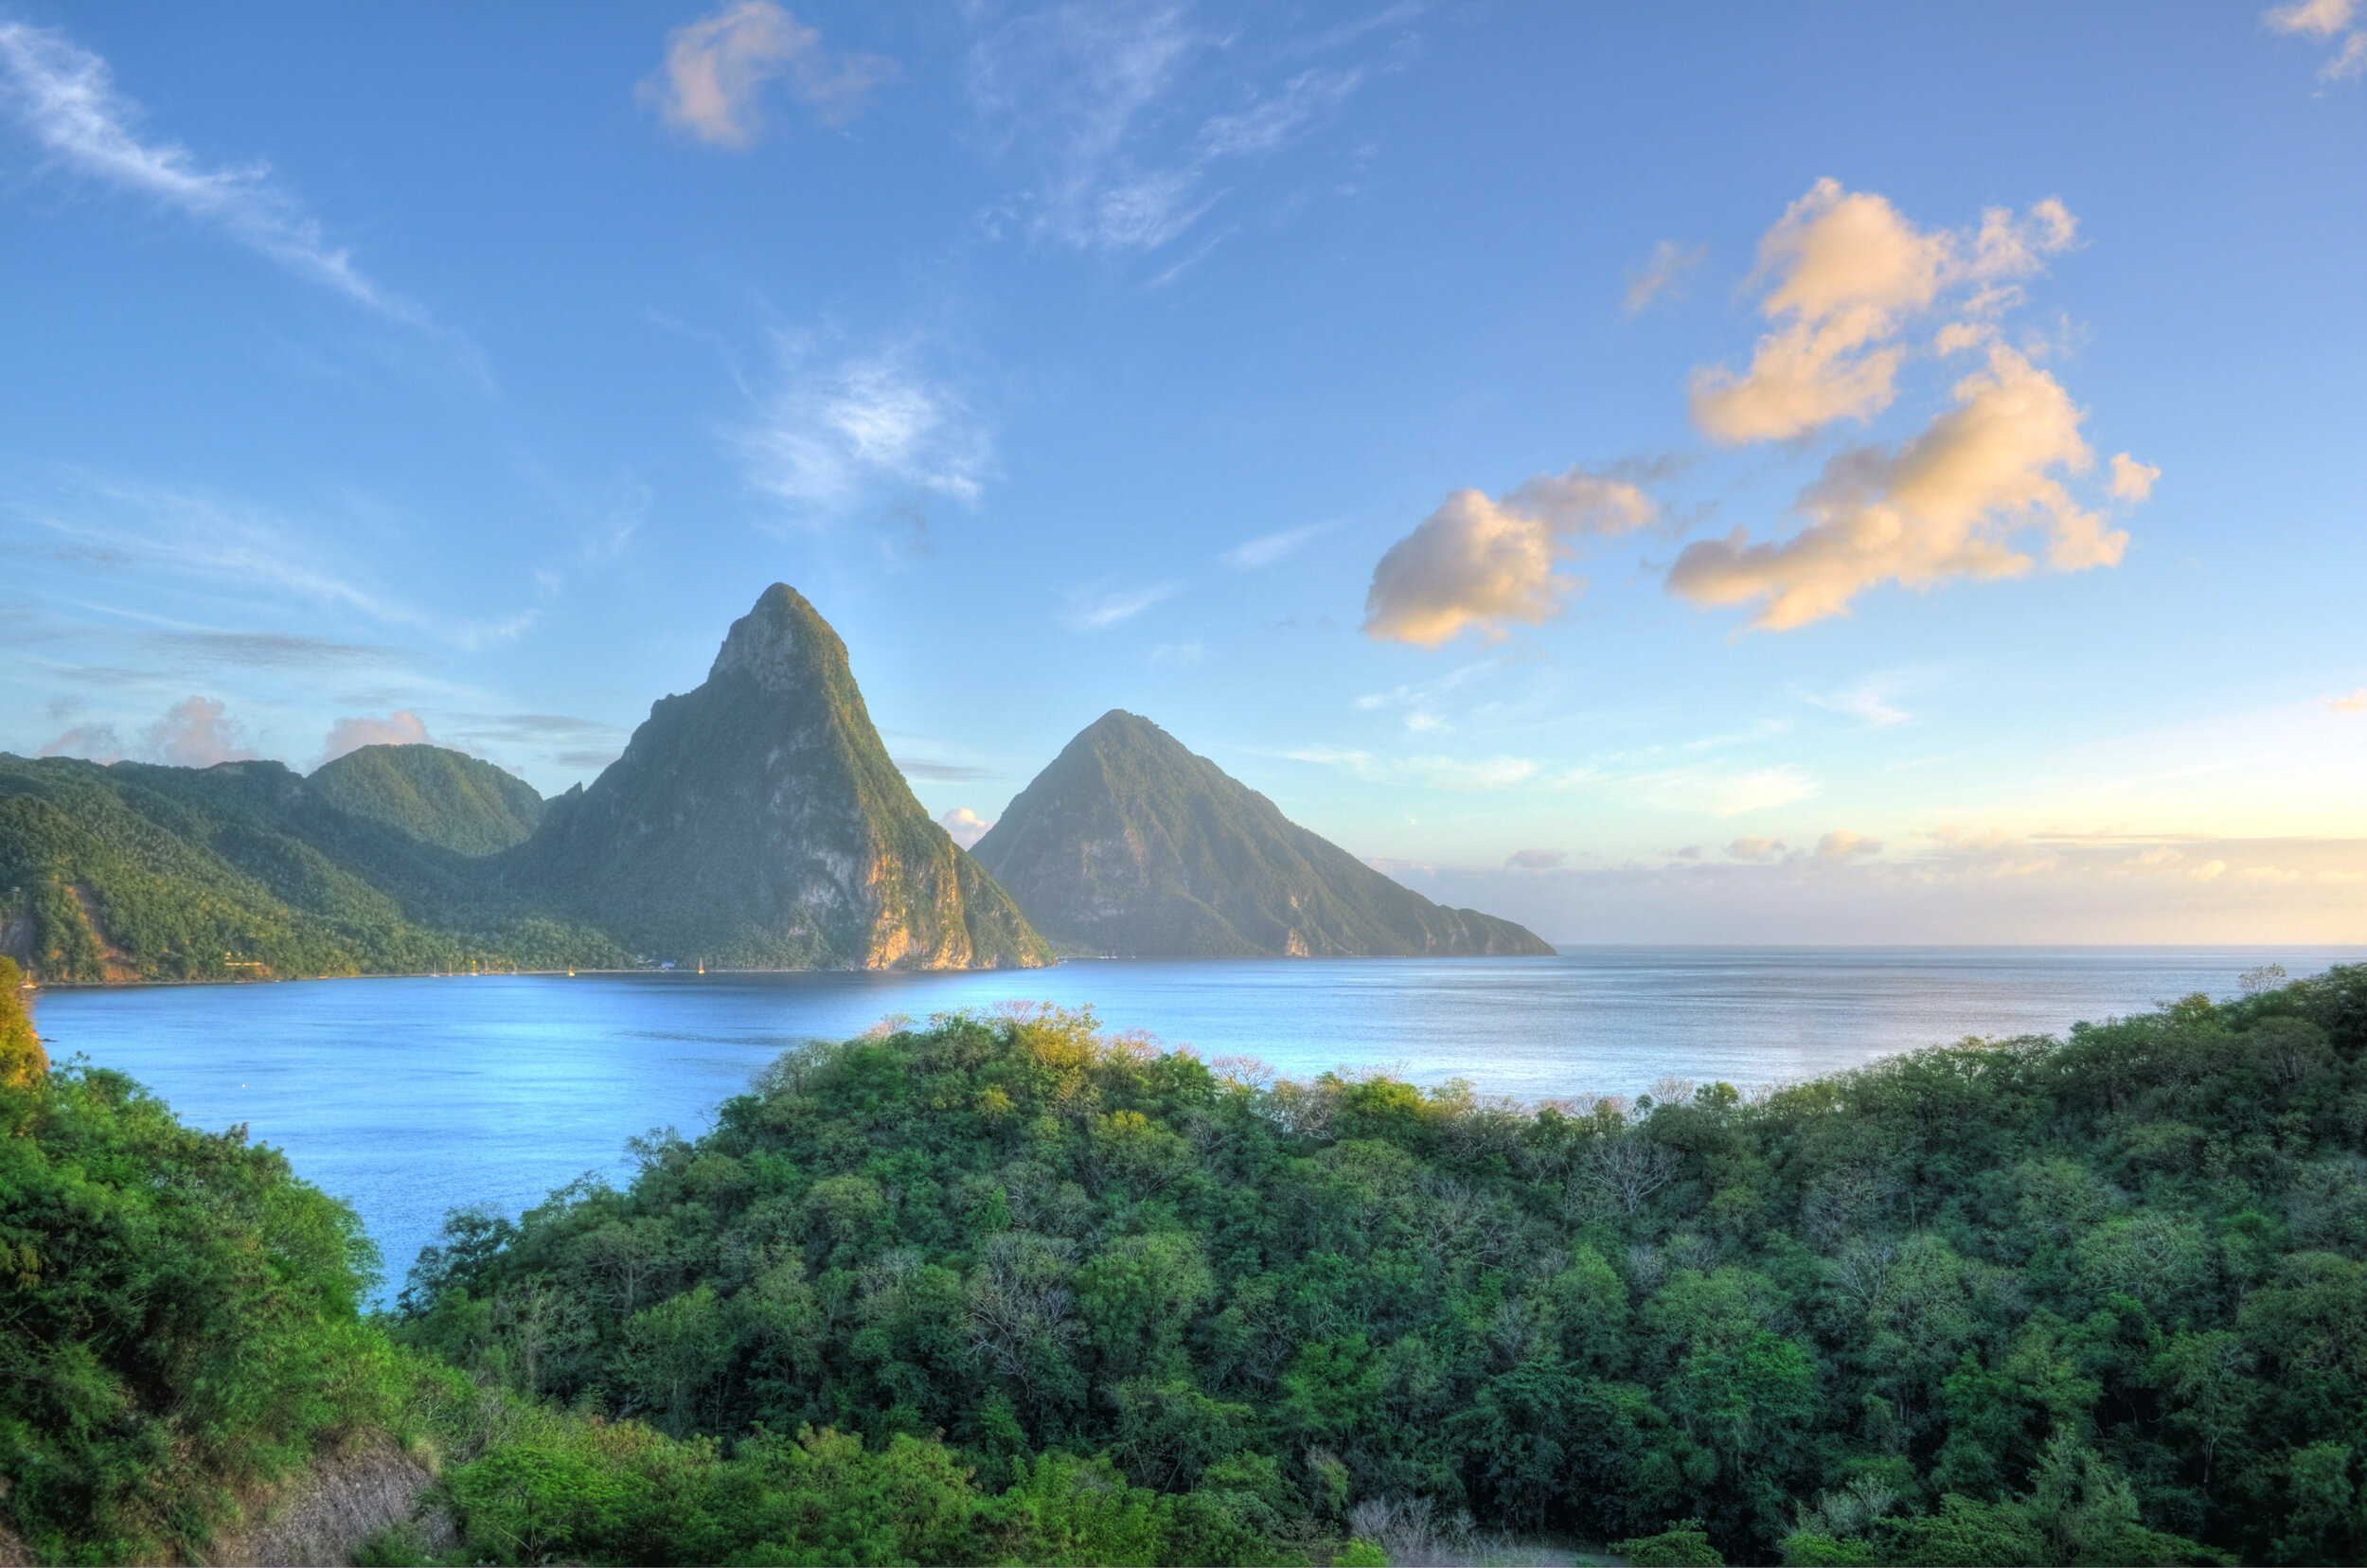   St. Lucia (photo credit: Ritz-Carlton Yacht Collection)  